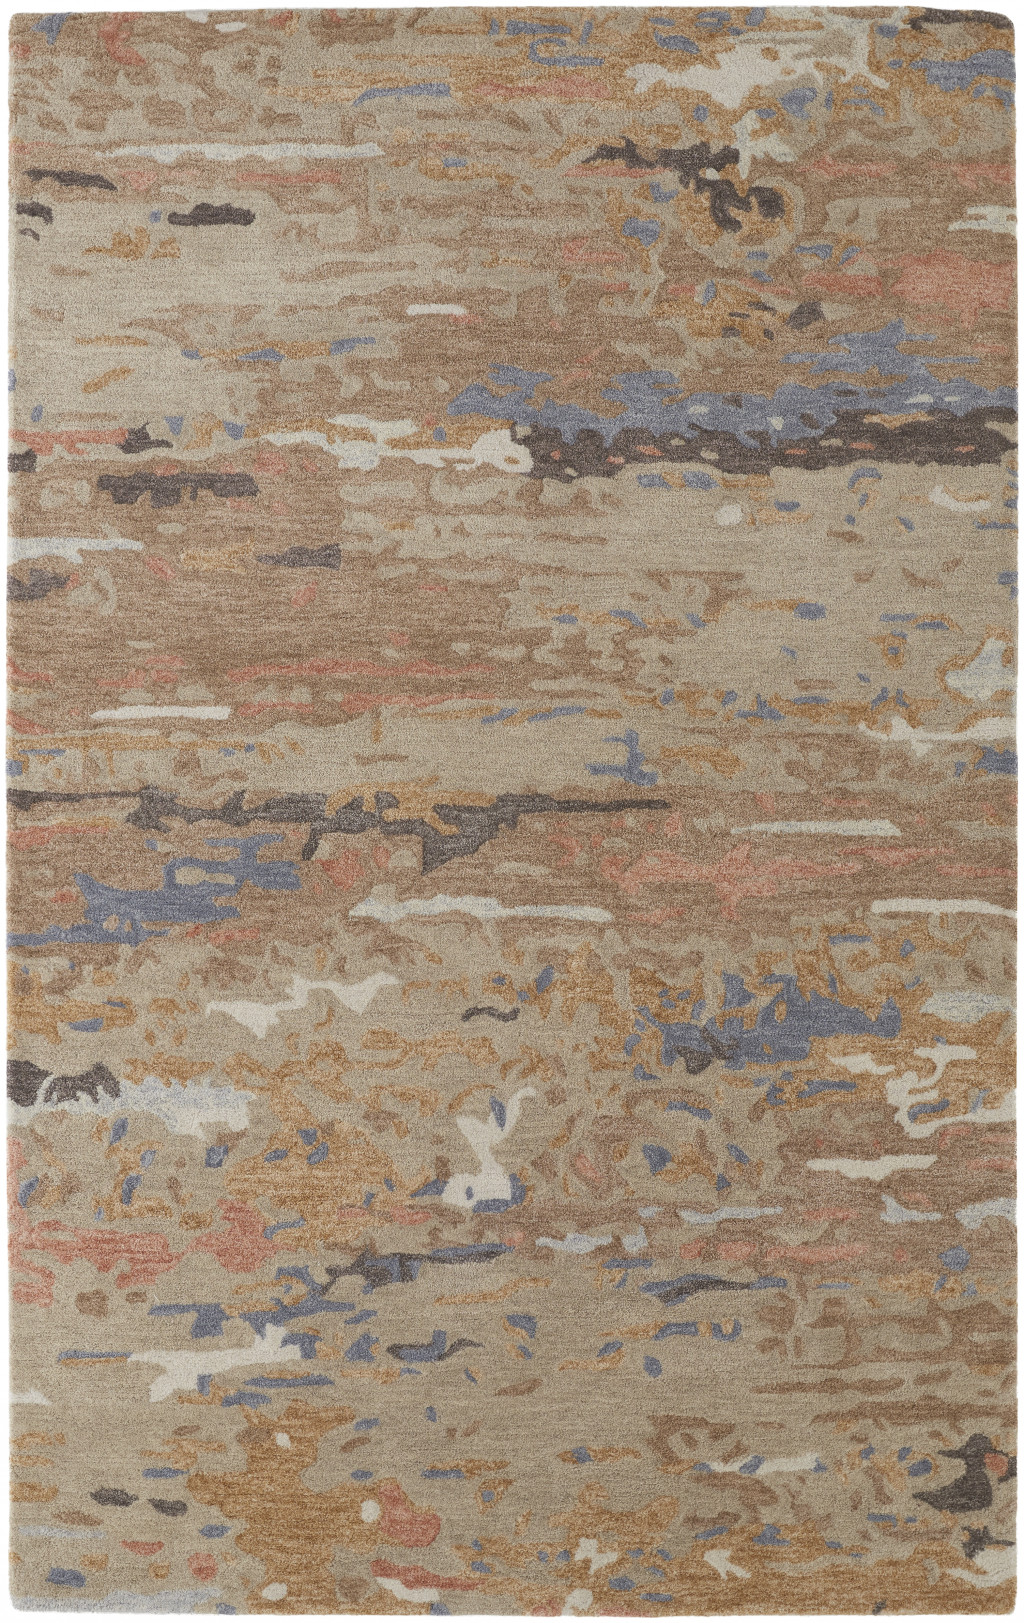 5' X 8' Tan And Blue Wool Abstract Tufted Handmade Stain Resistant Area Rug-513608-1